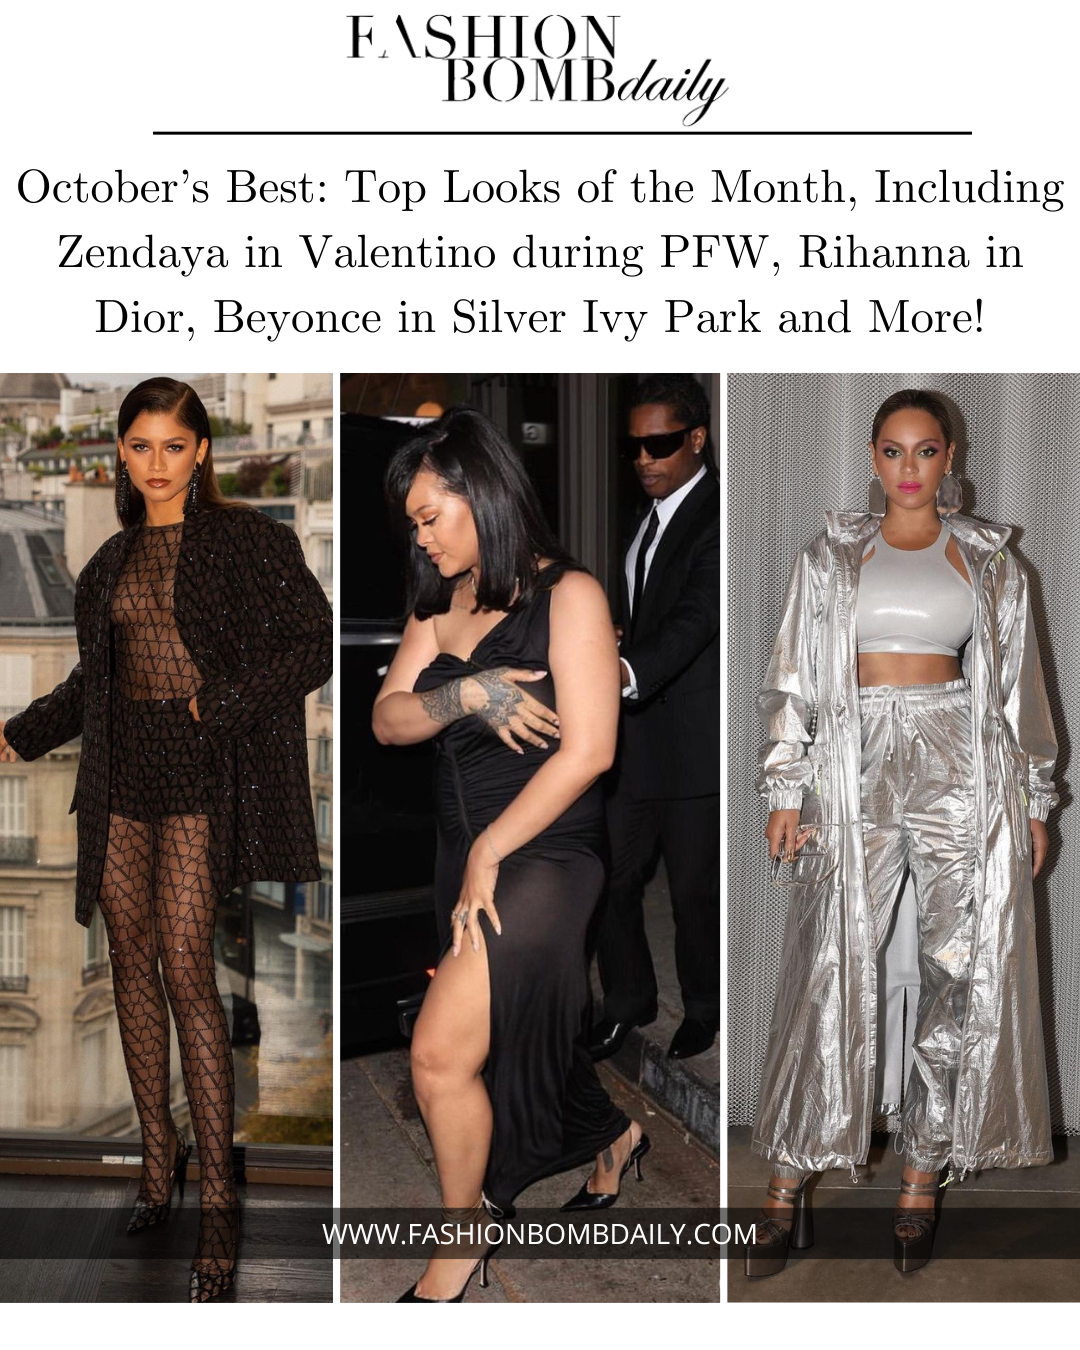 Top Looks of the Month, Including Zendaya in Valentino during PFW, Rihanna in Dior, Beyonce in Silver Ivy Park and More!